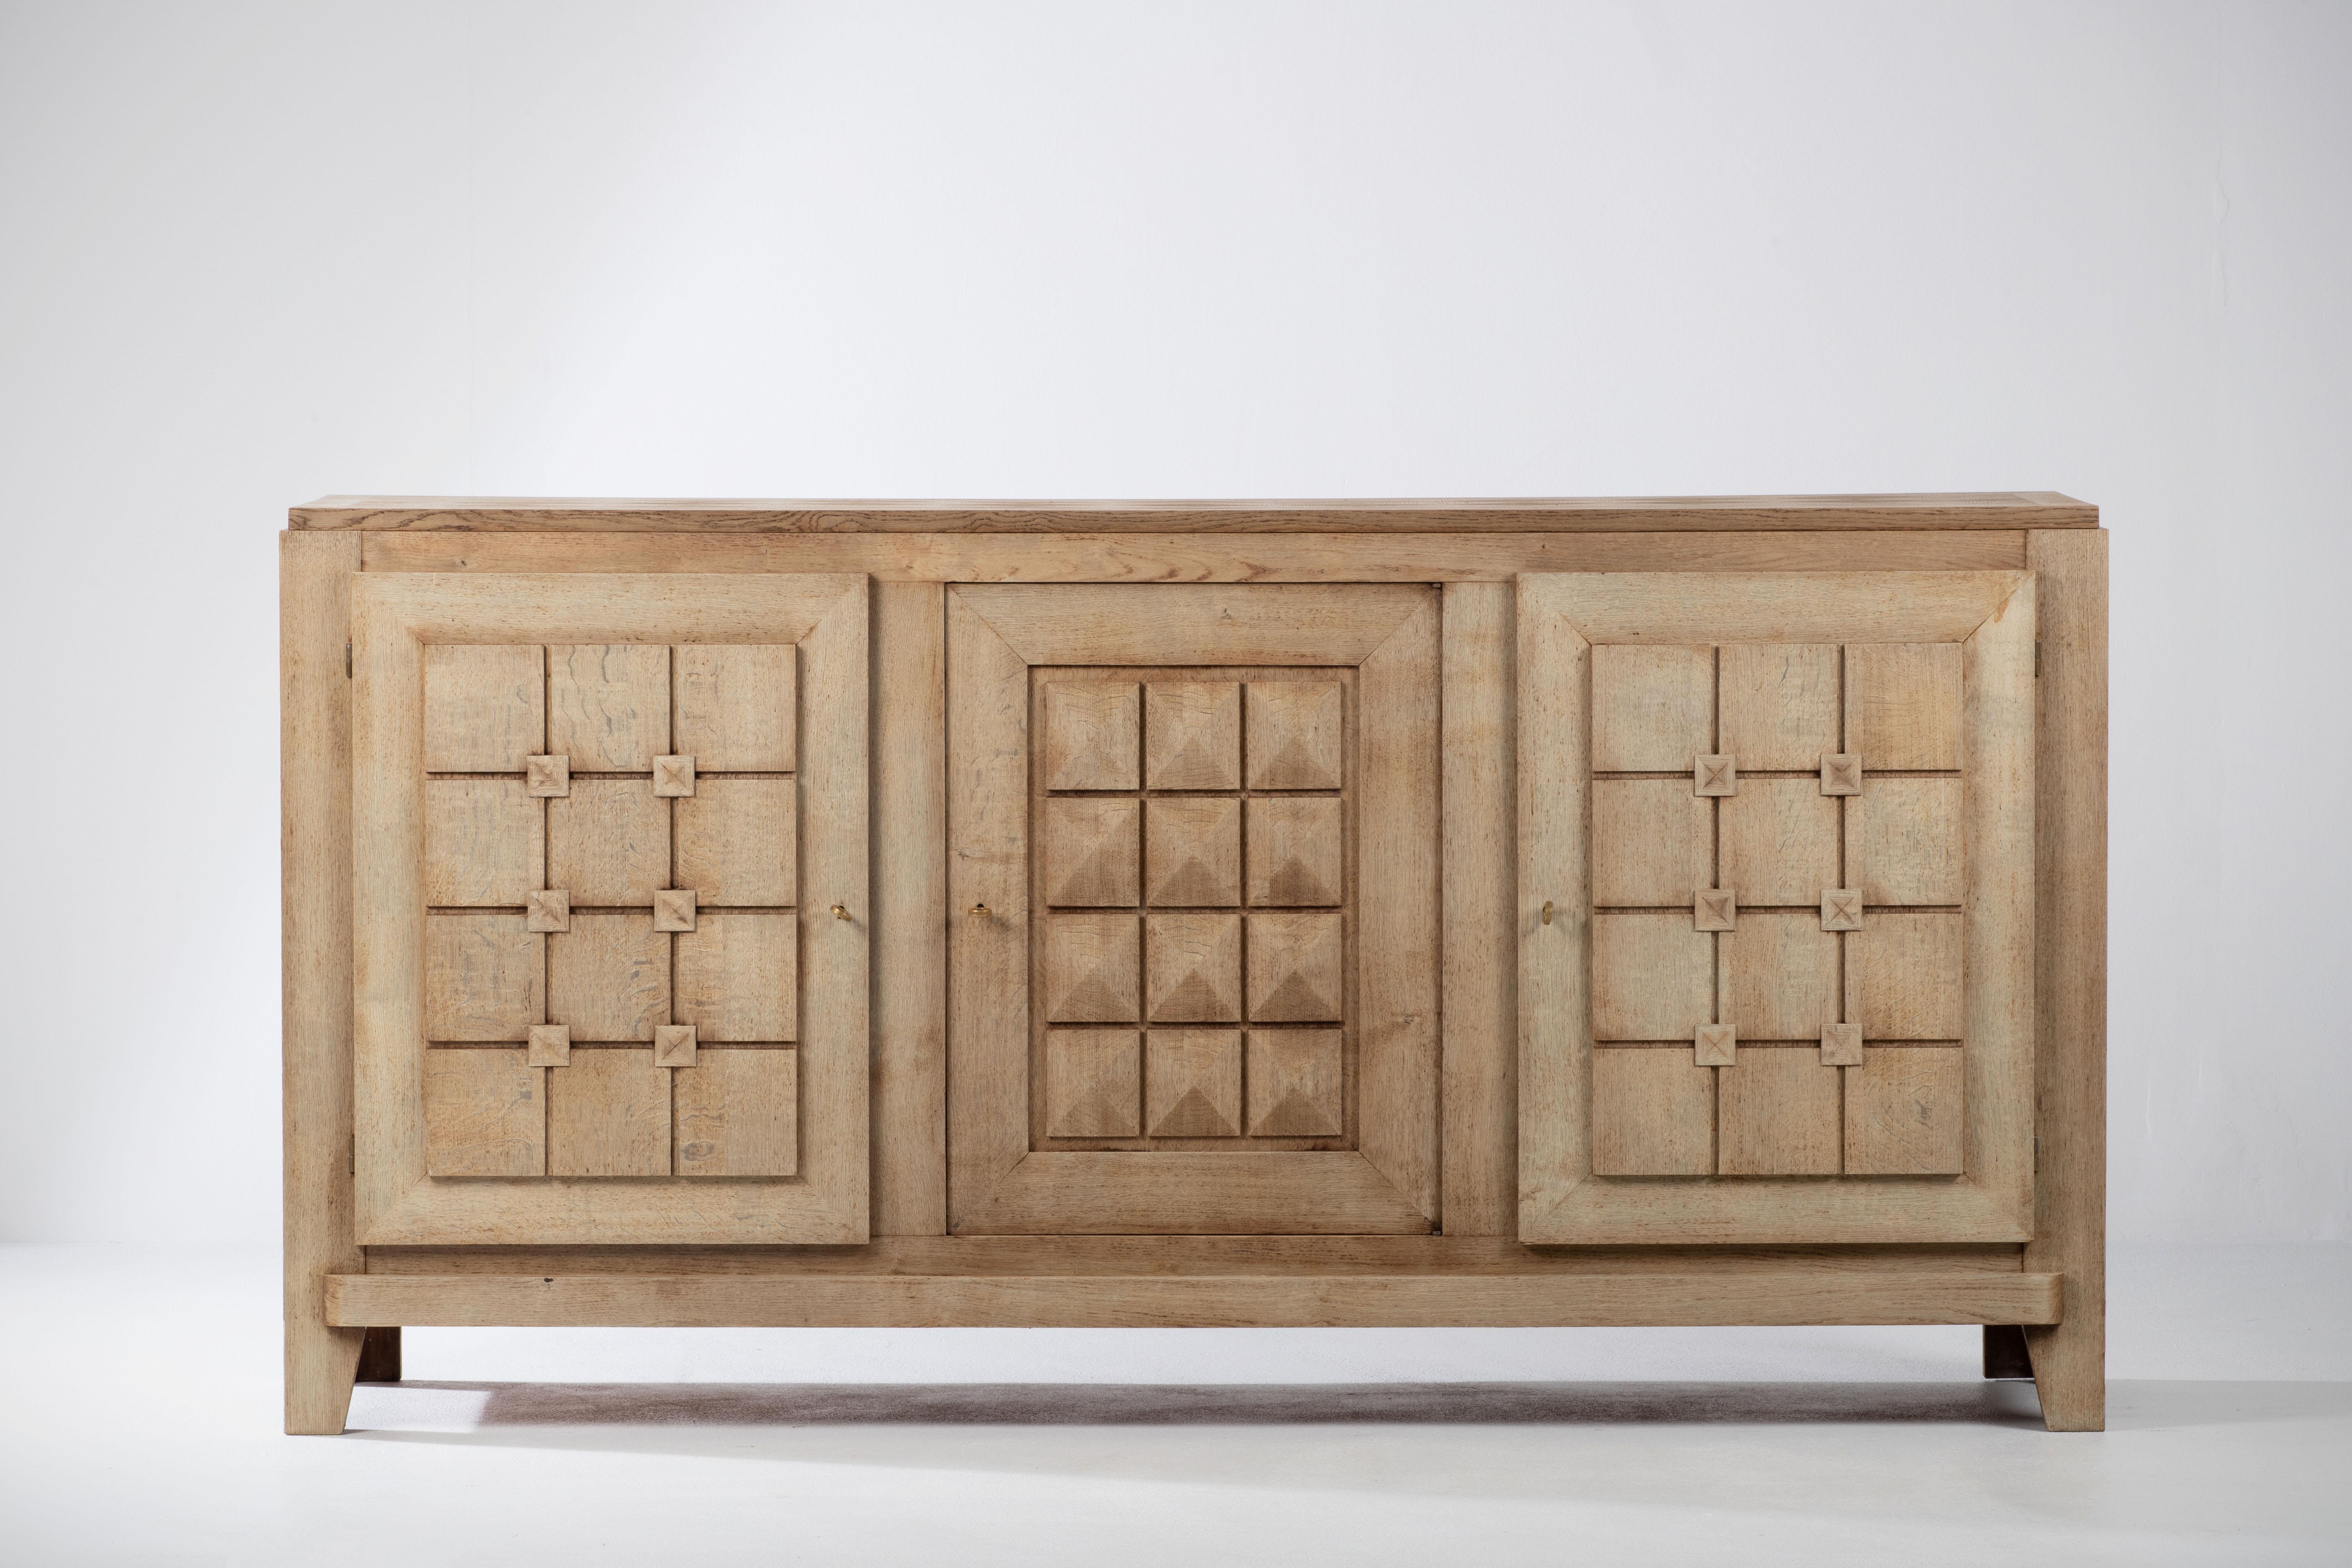 Large Credenza, solid oak, France, attributed to Charles Dudouyt, 1940s.
Large Art Deco Brutalist sideboard. 
The credenza consists of three storage facilities and covered with very detailed designed doors. 
The refined wooden structures on the